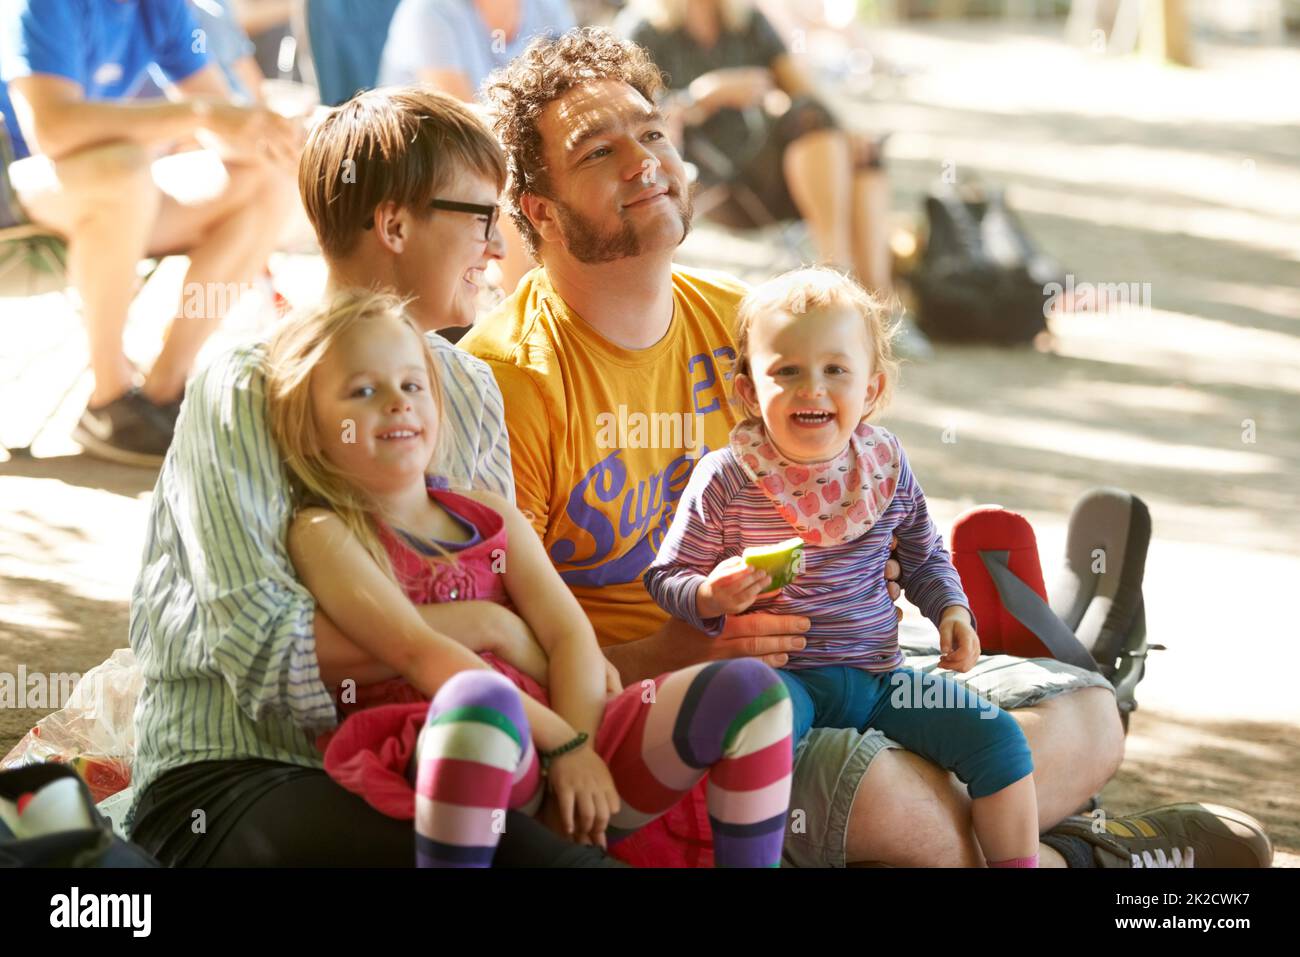 Sitting down to watch the bands. A young family of four sitting down to enjoy the bands at an outdoors music festival. Stock Photo